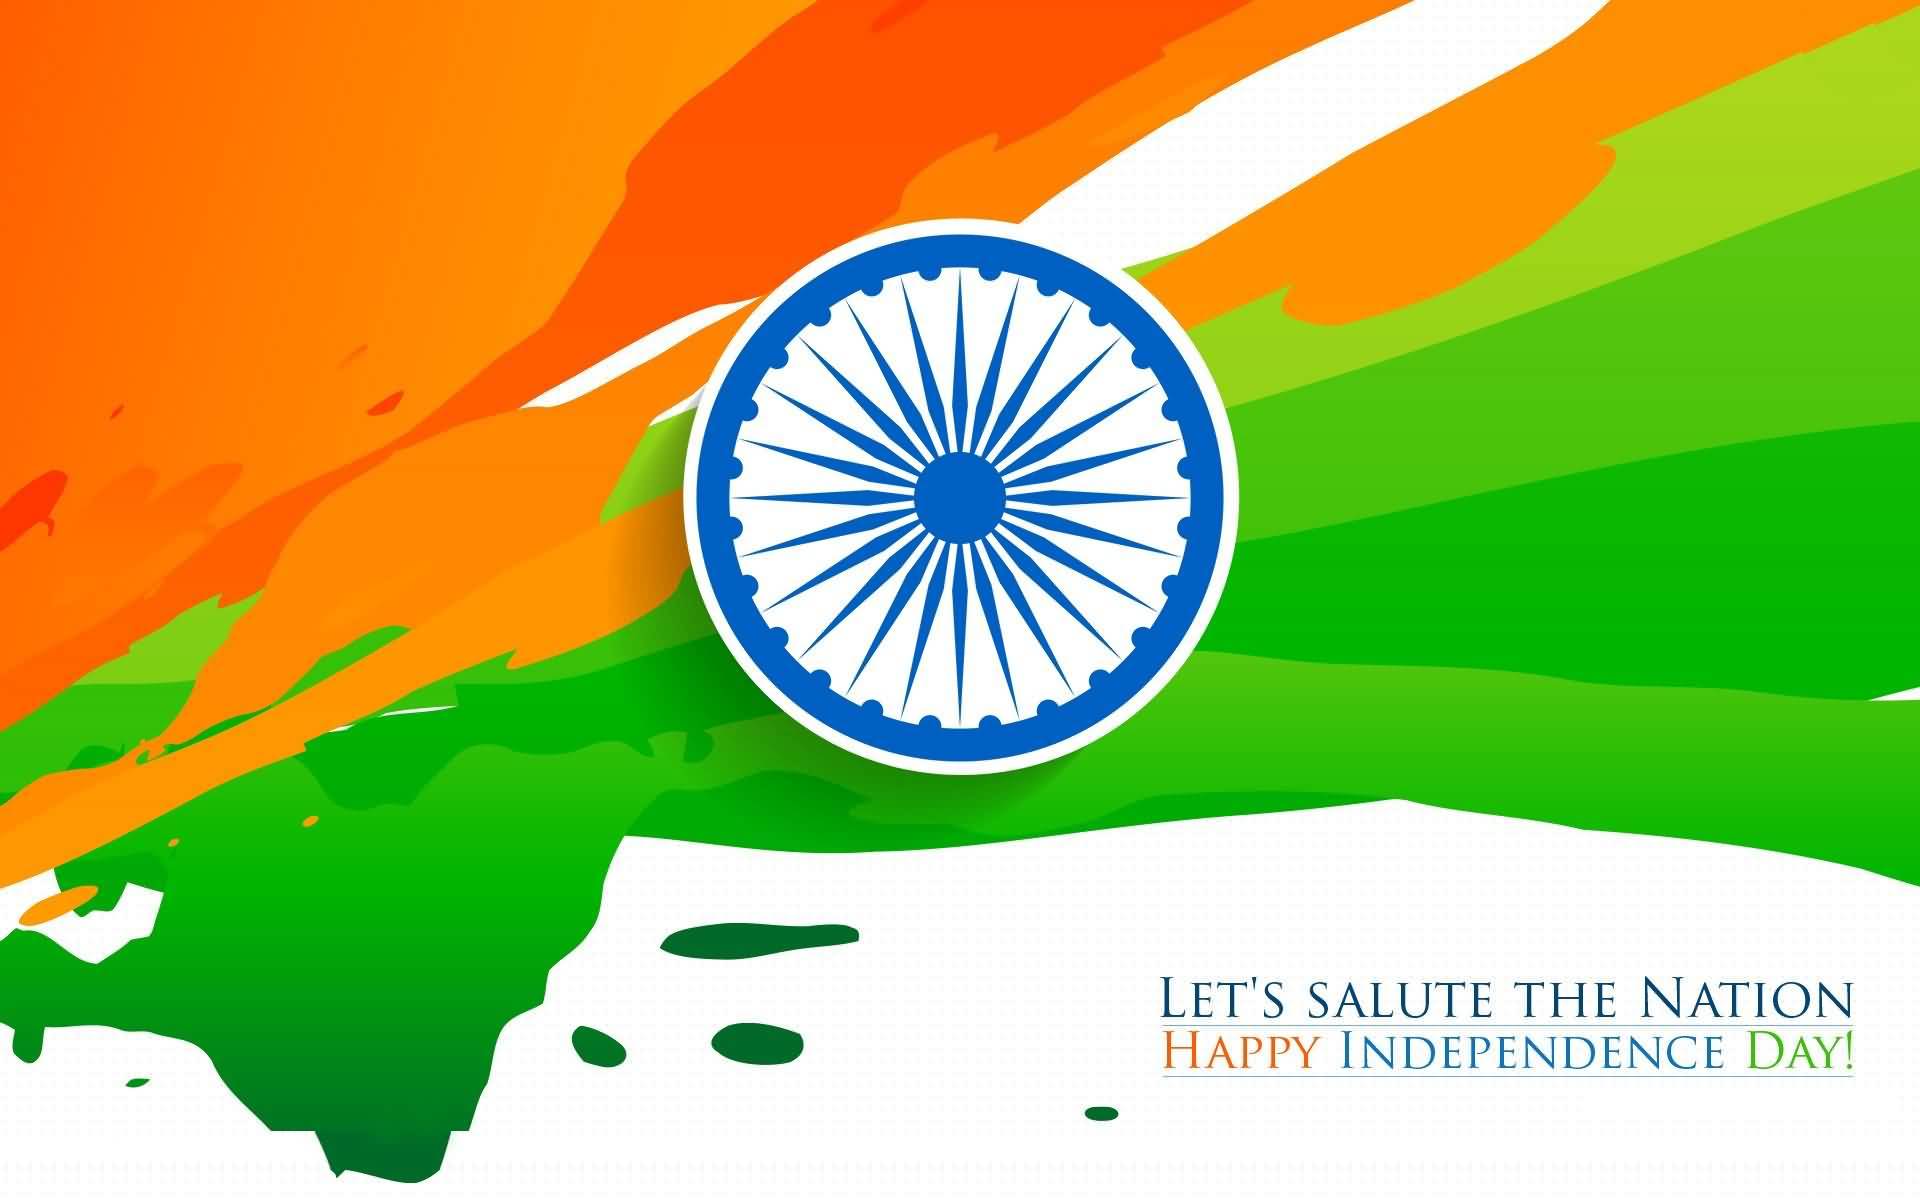 Let’s Salute The Nation Happy Independence Day